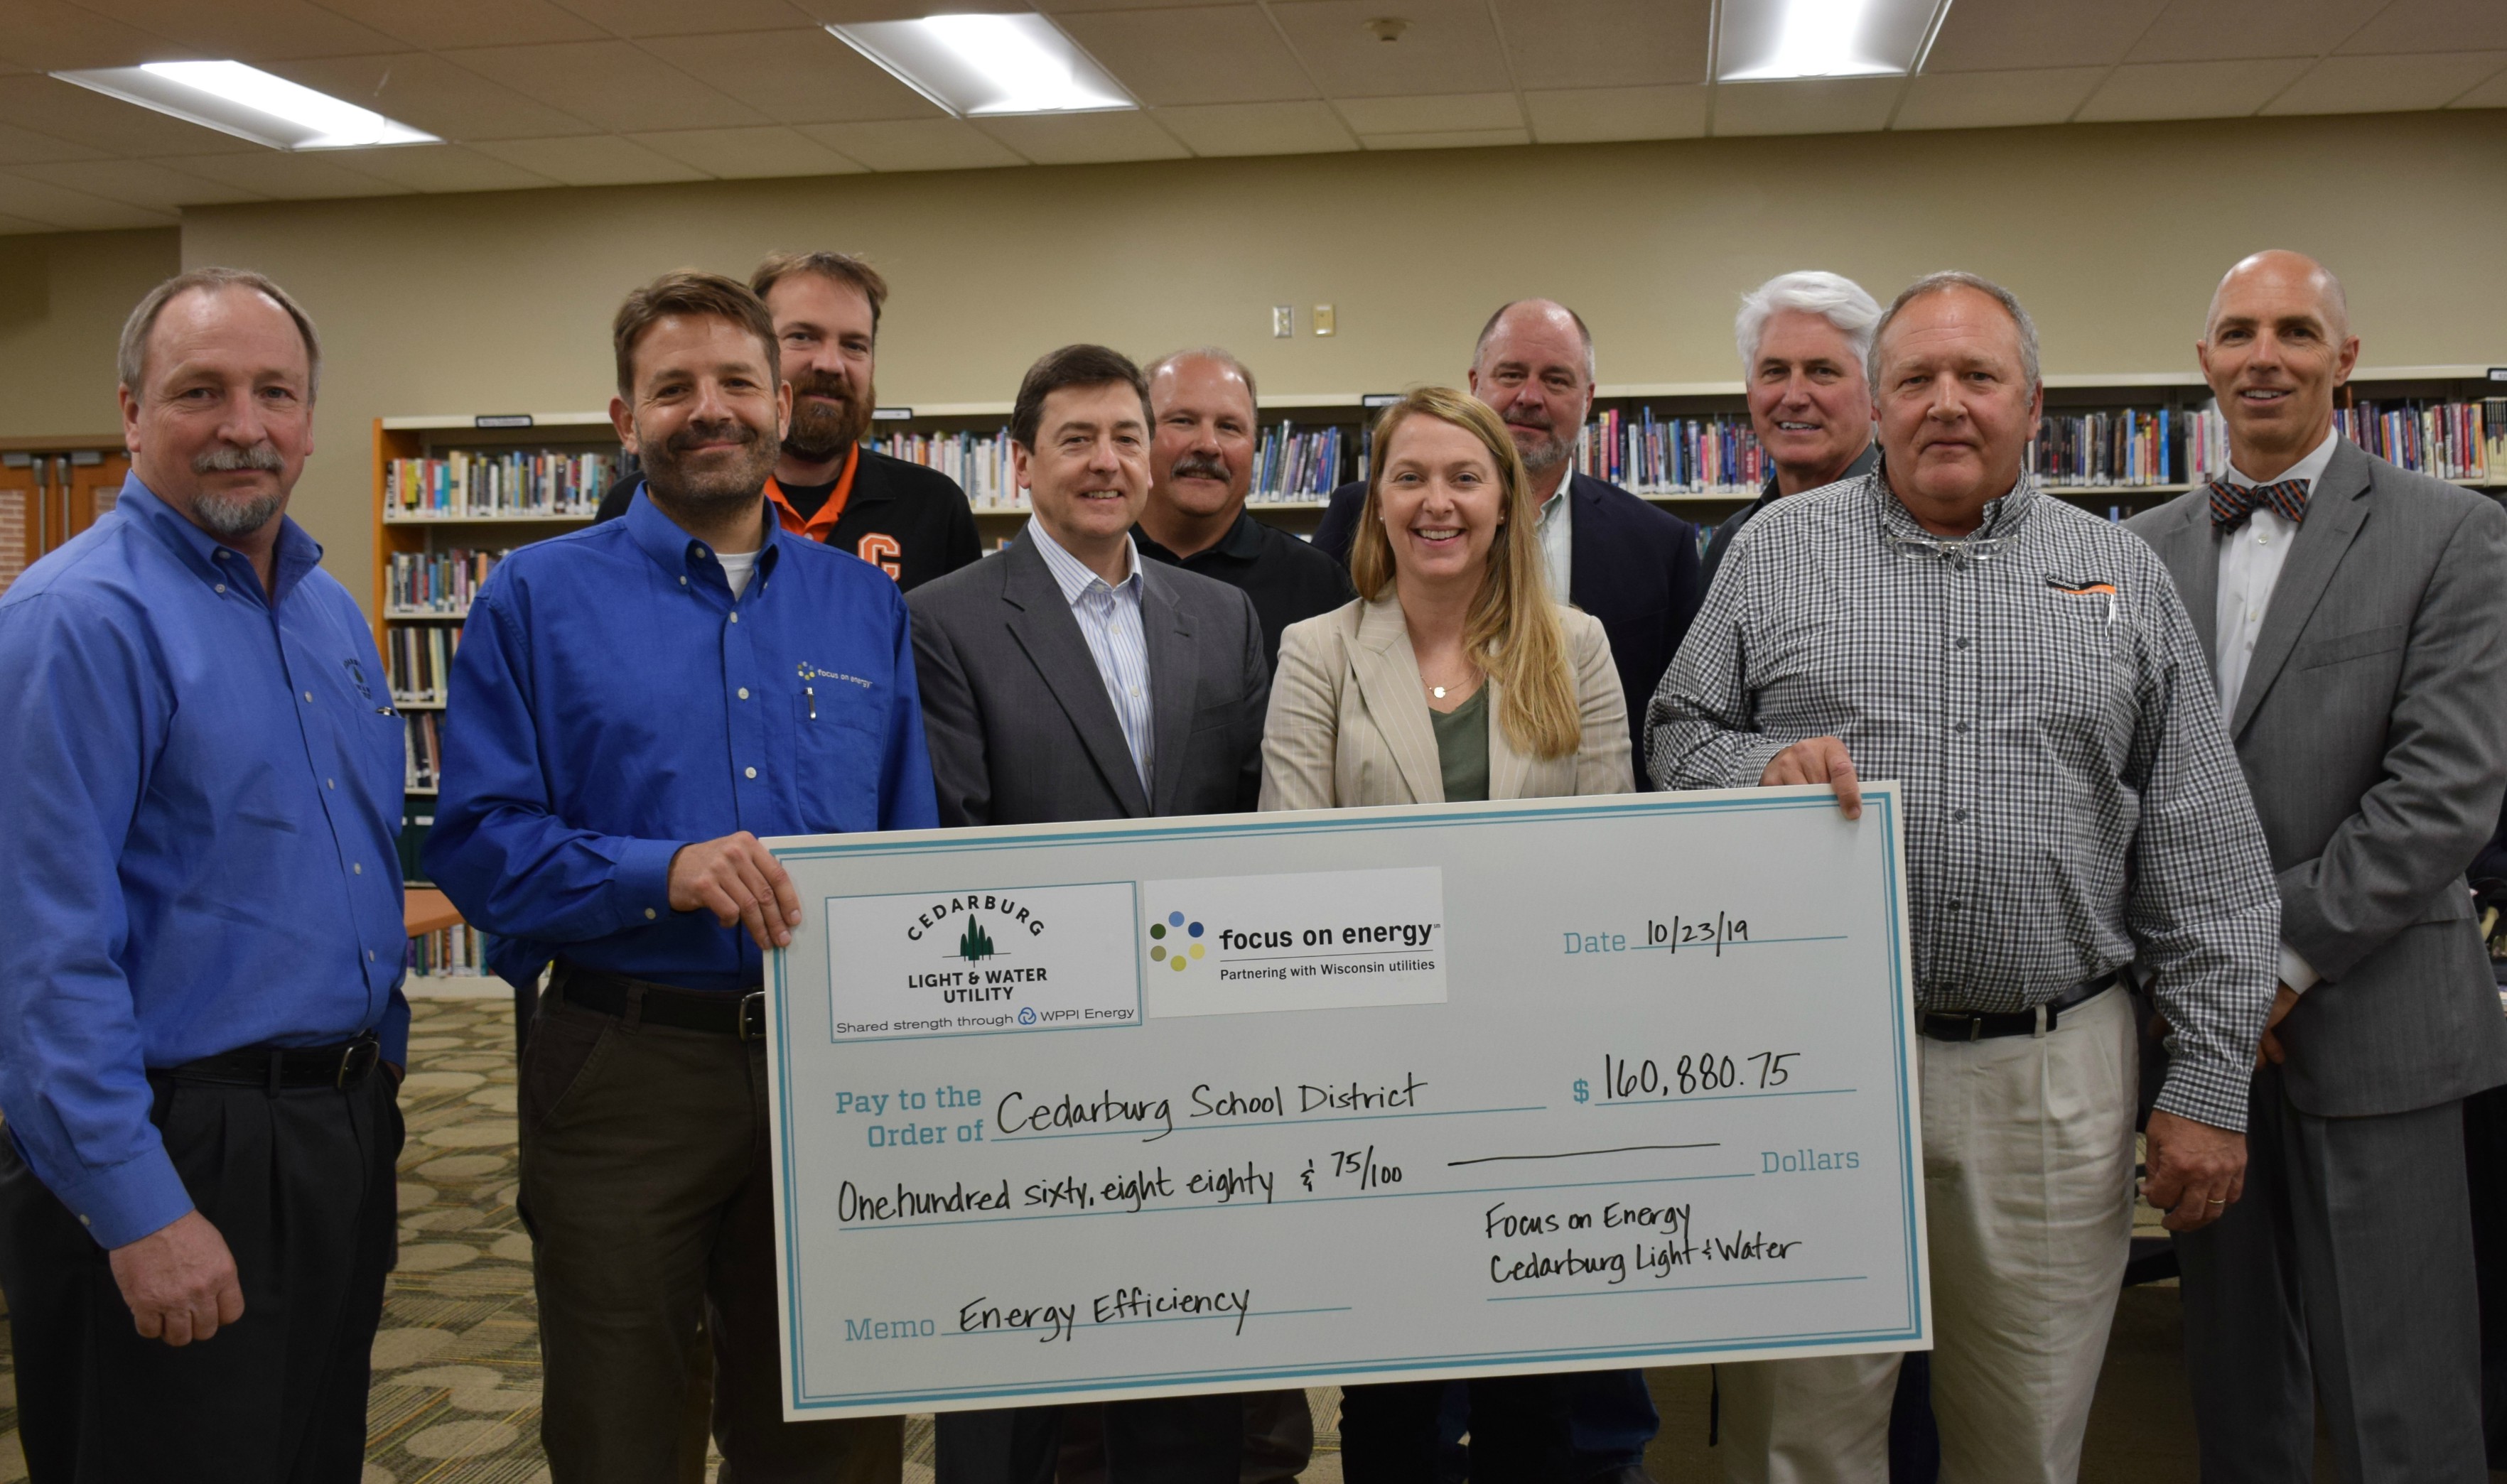 A group of professionally-dressed people stand in a room with bookshelves, holding a large check from Cedarburg Light & Water Utility and Focus on Energy.